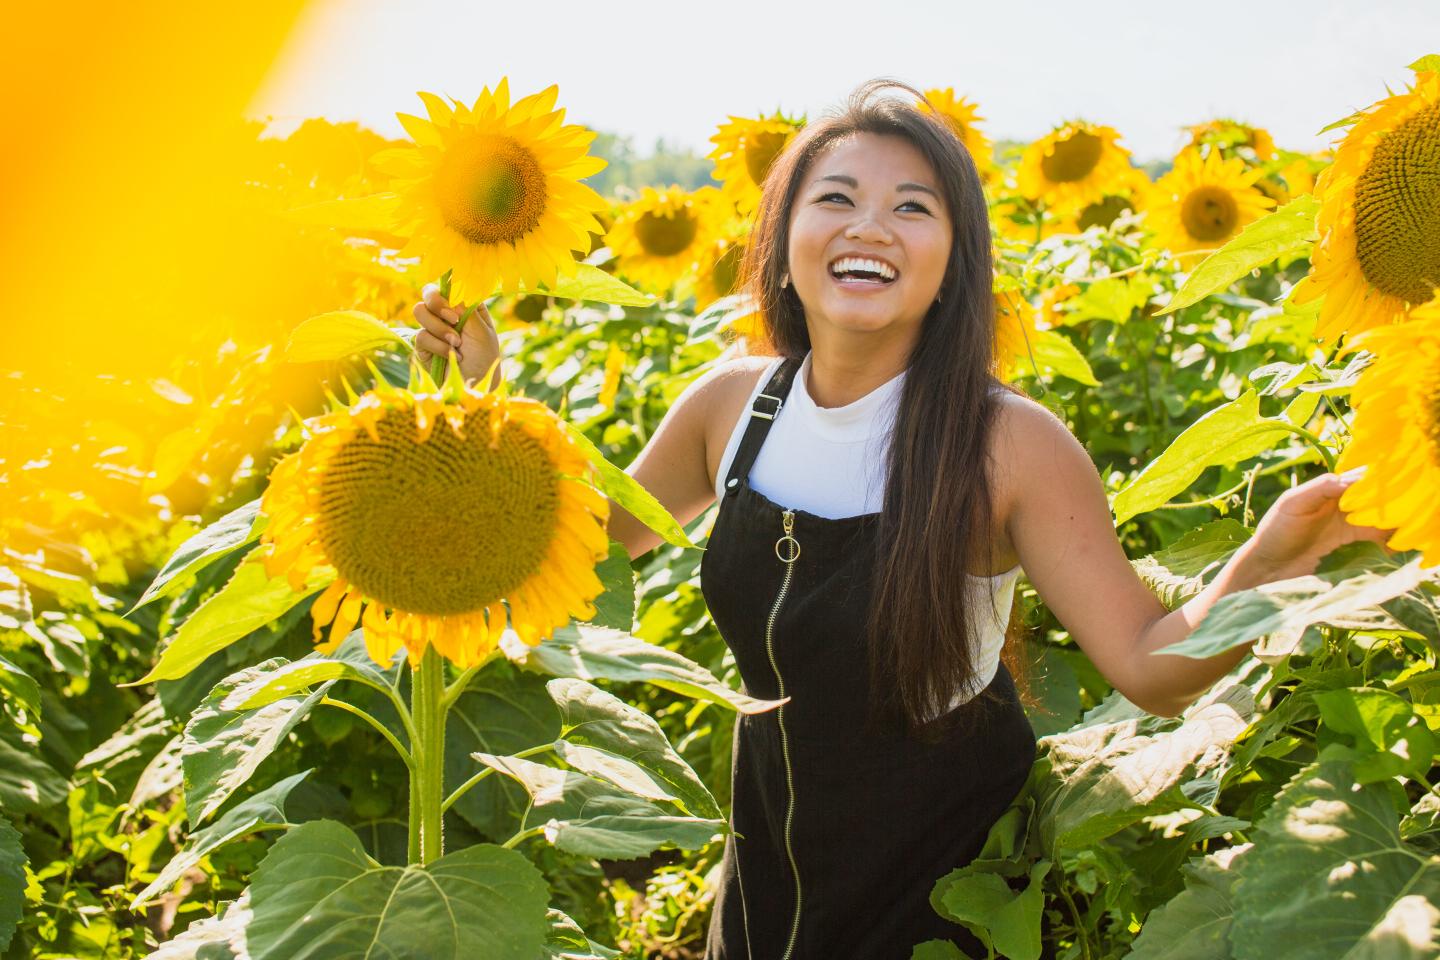 Woman Smiling in Field of Sunflowers